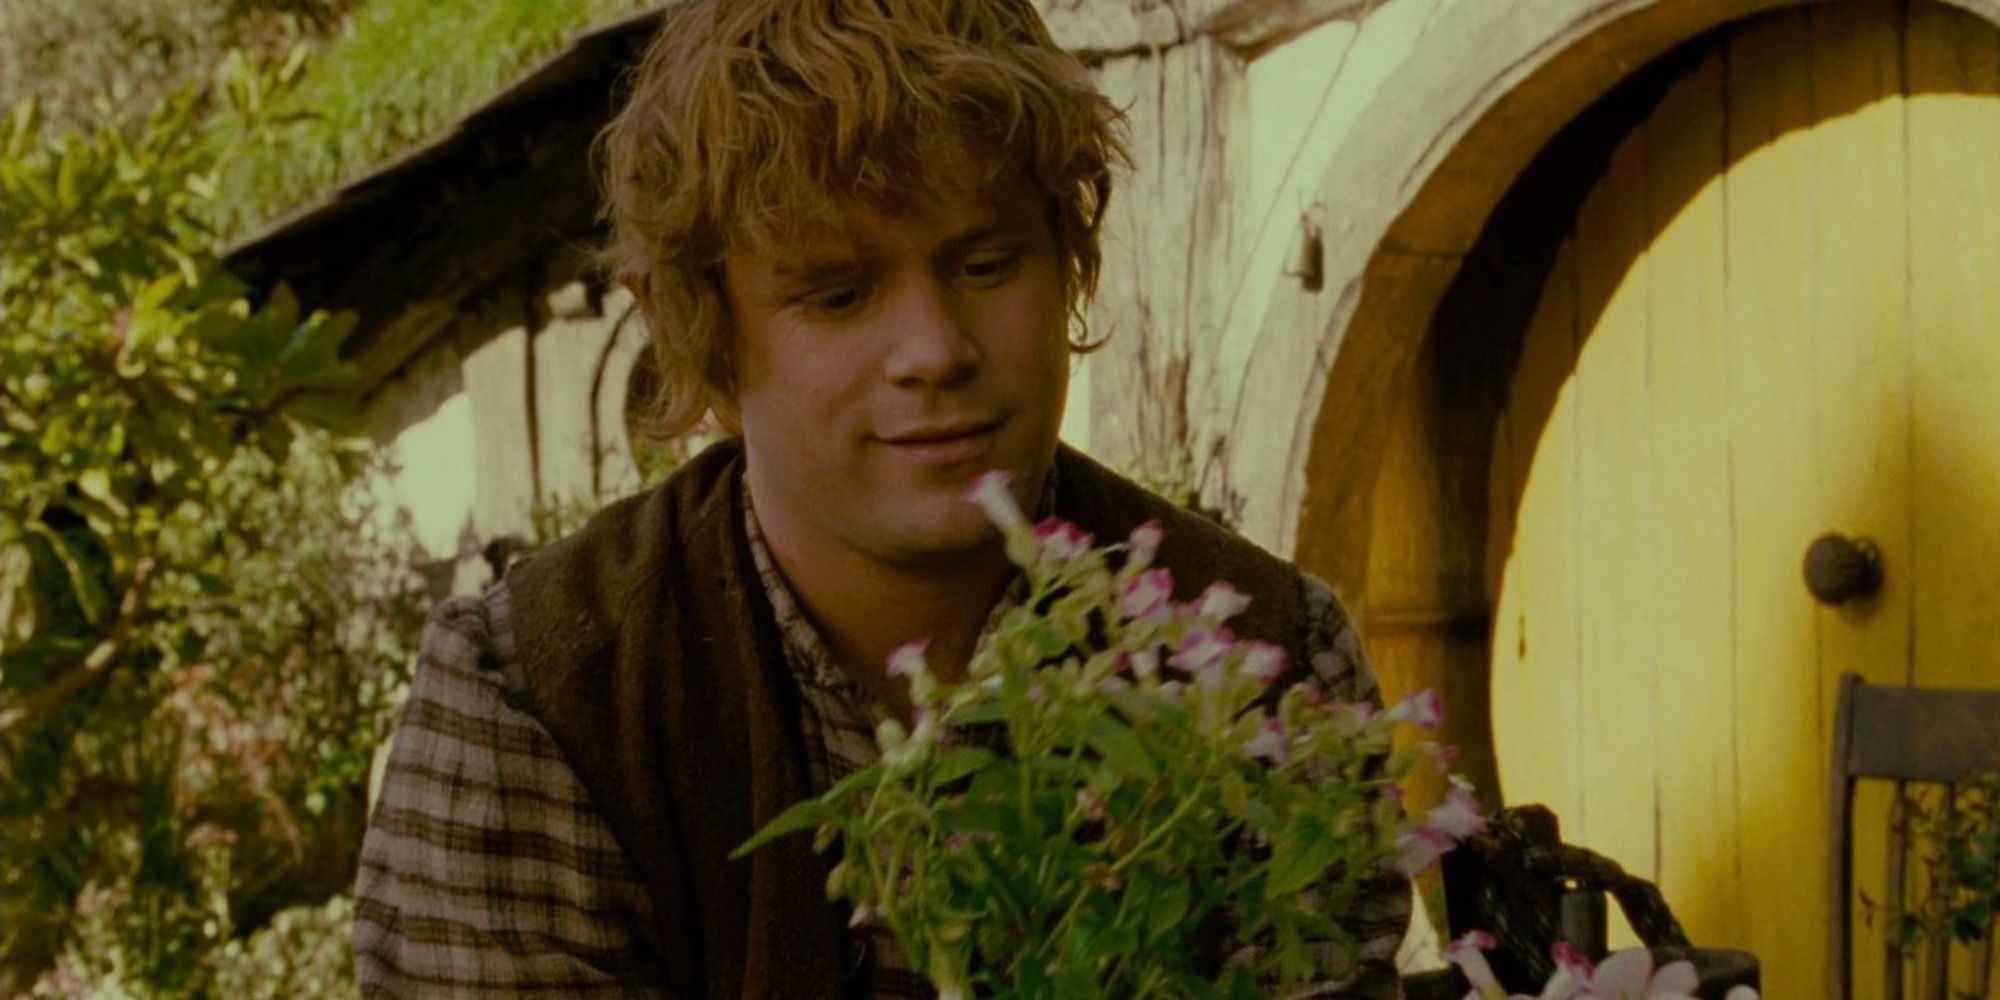 Sam planting flowers in The Lord of the Rings The Fellowship of the Ring